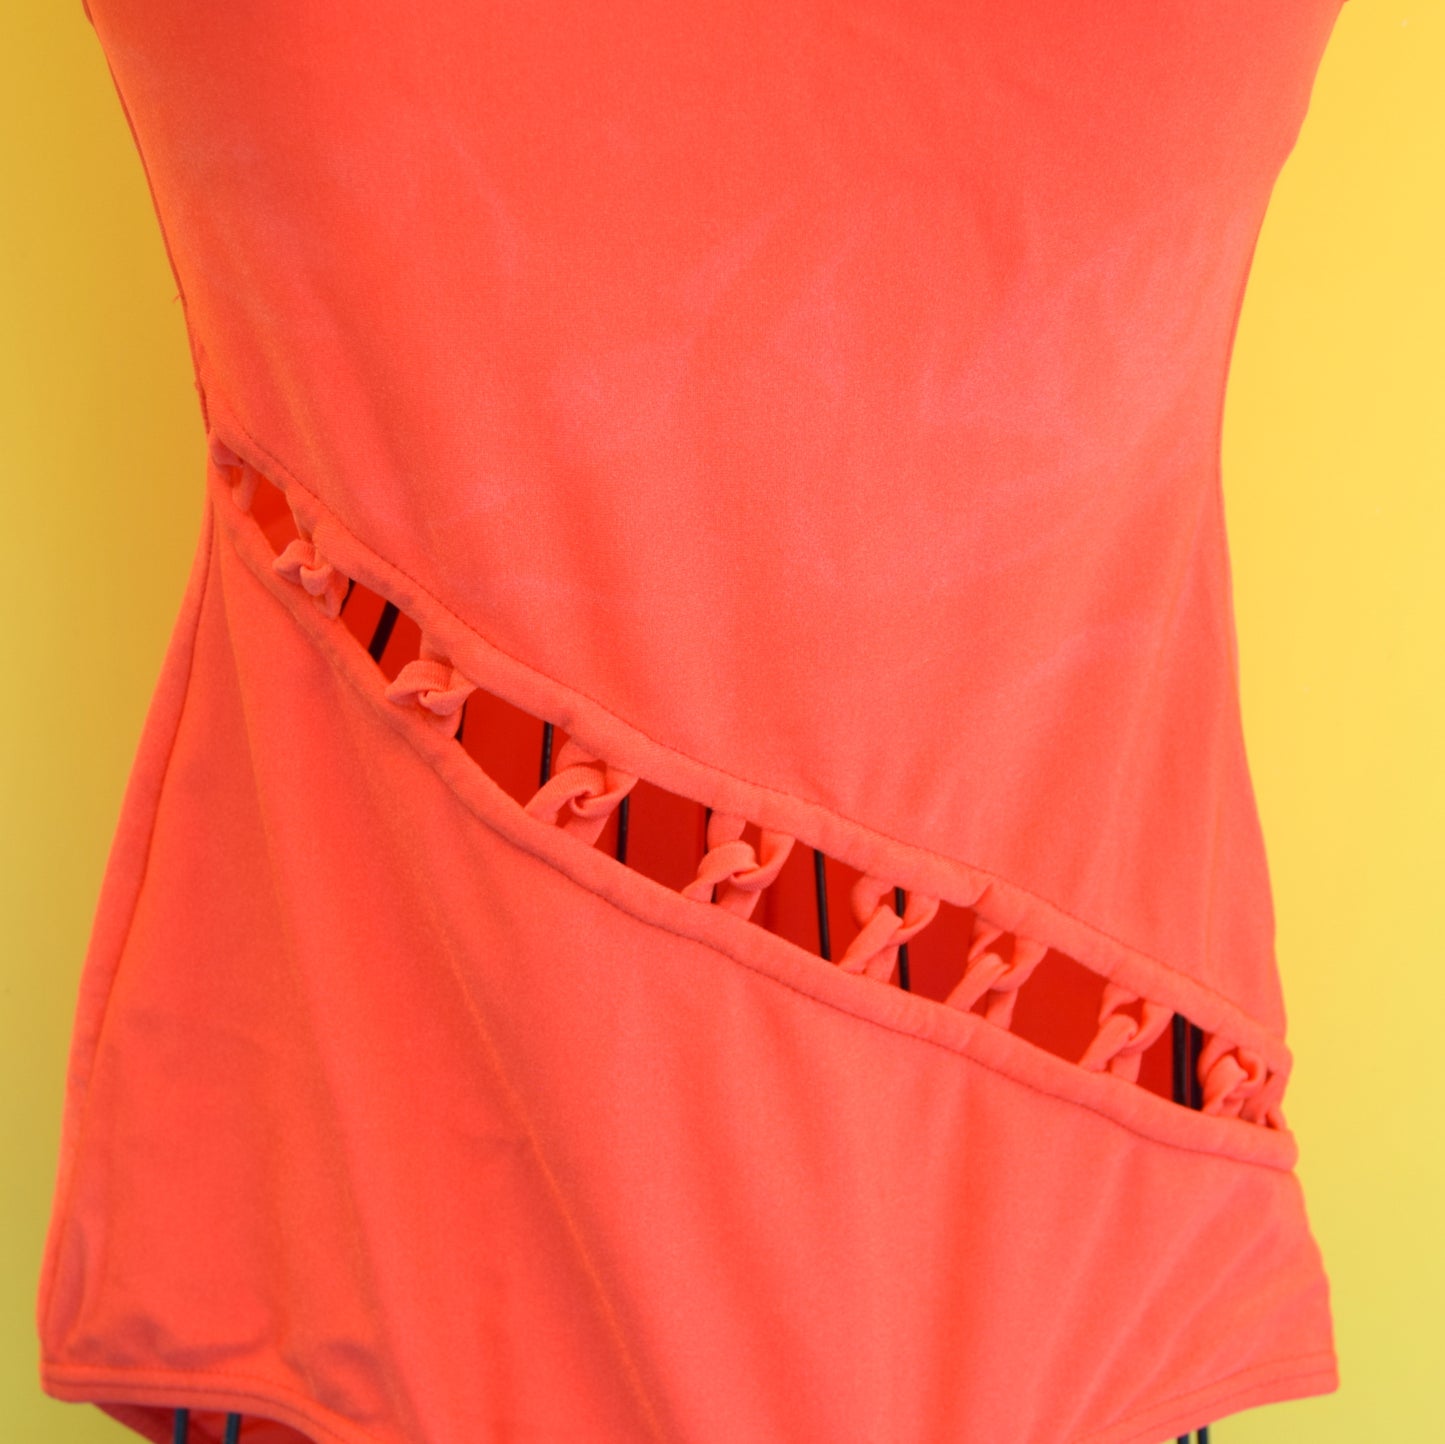 Vintage 1970s Swimming Costume - Coral Red Cutout - Uk 12-14